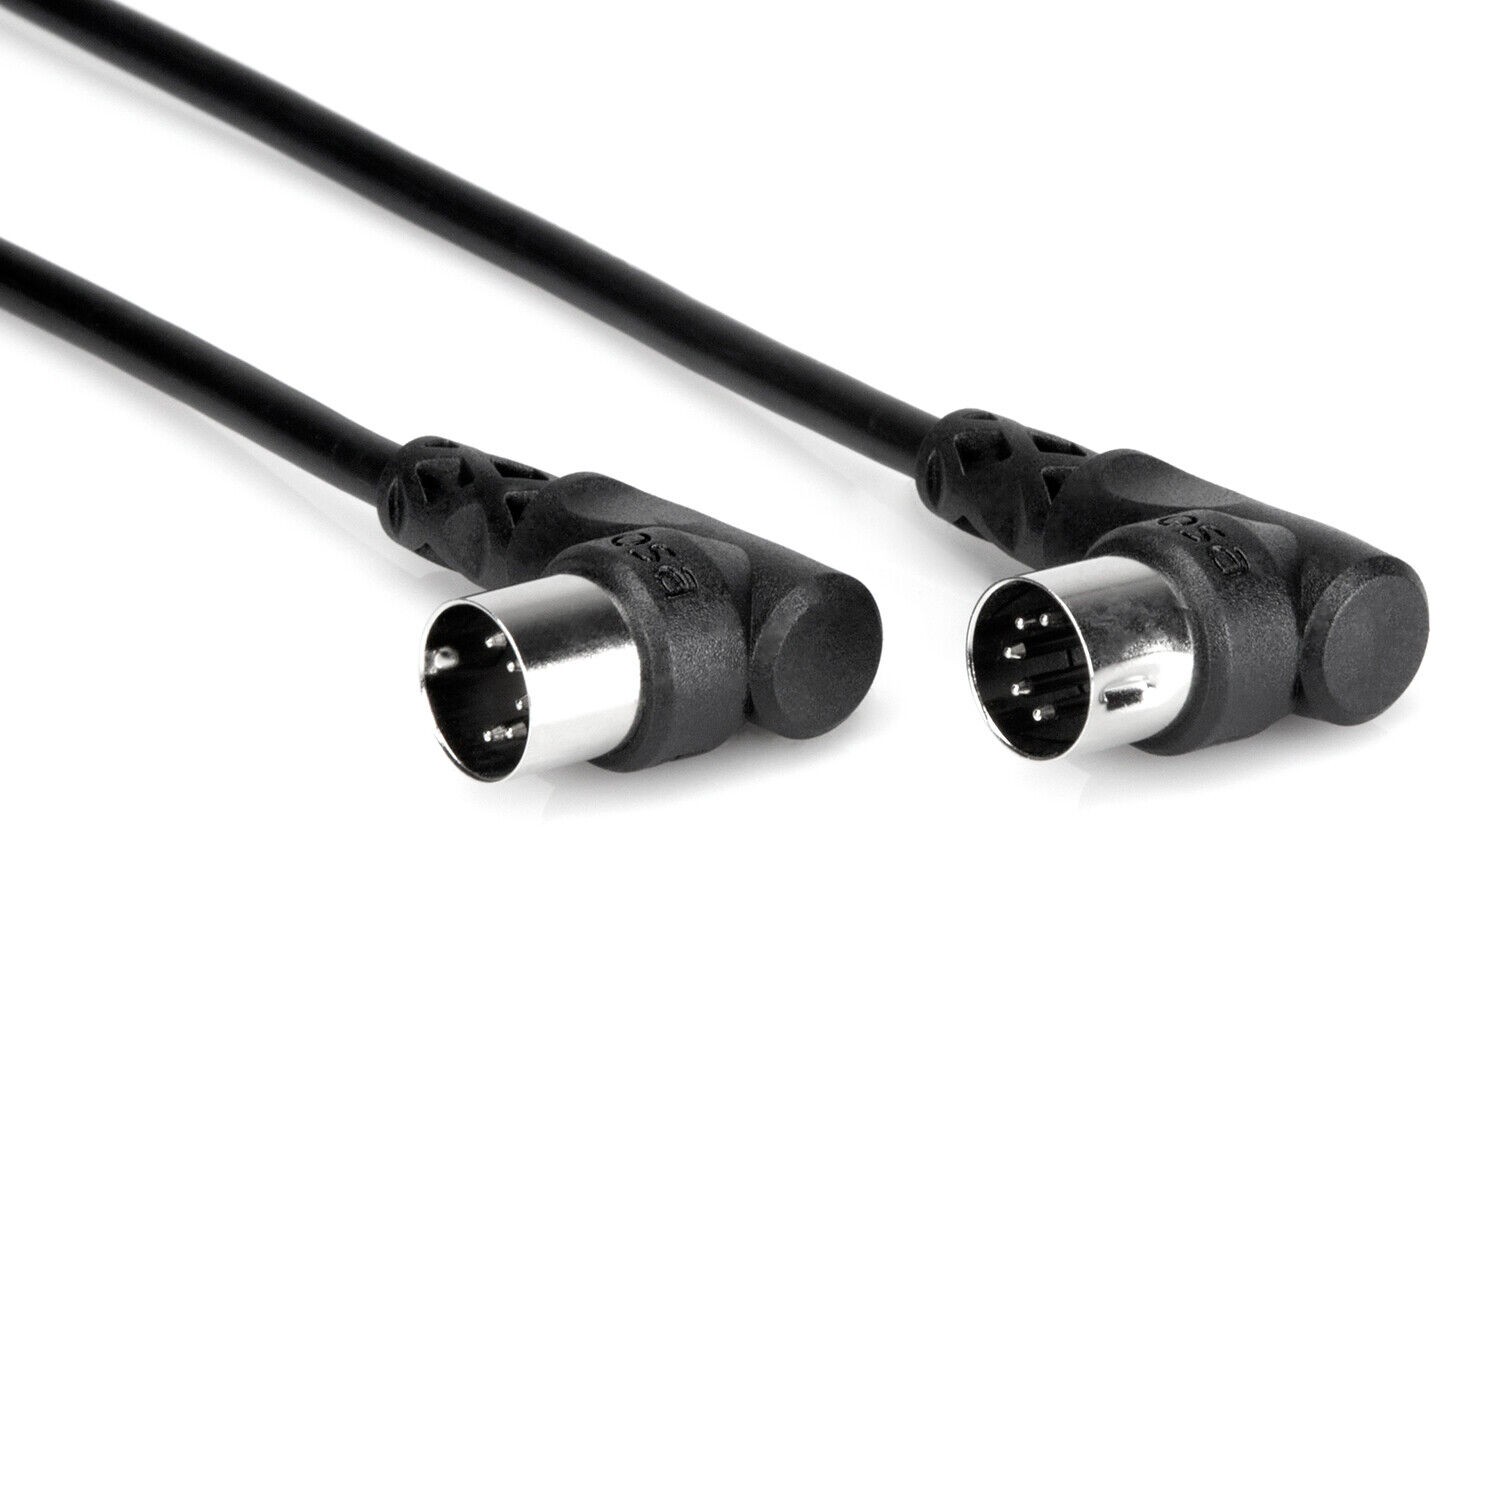 Hosa wholesale MID-303RR Free Shipping Cheap Bargain Gift Right-angle MIDI DIN to 5-pin Cable